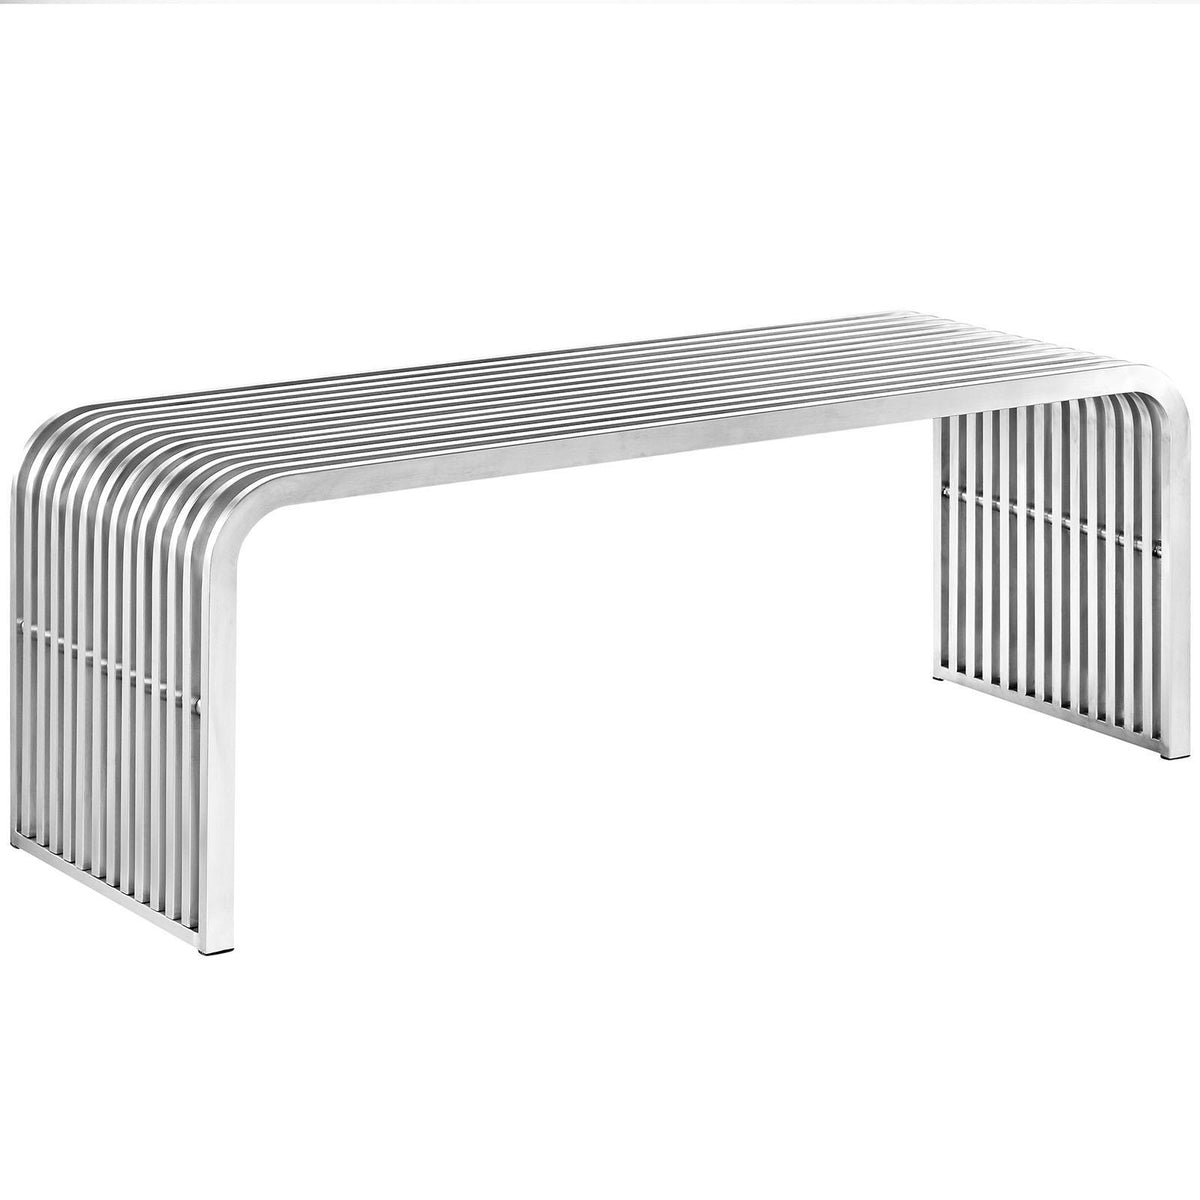 Modway Furniture Modern Pipe 47" Stainless Steel Bench - EEI-2102